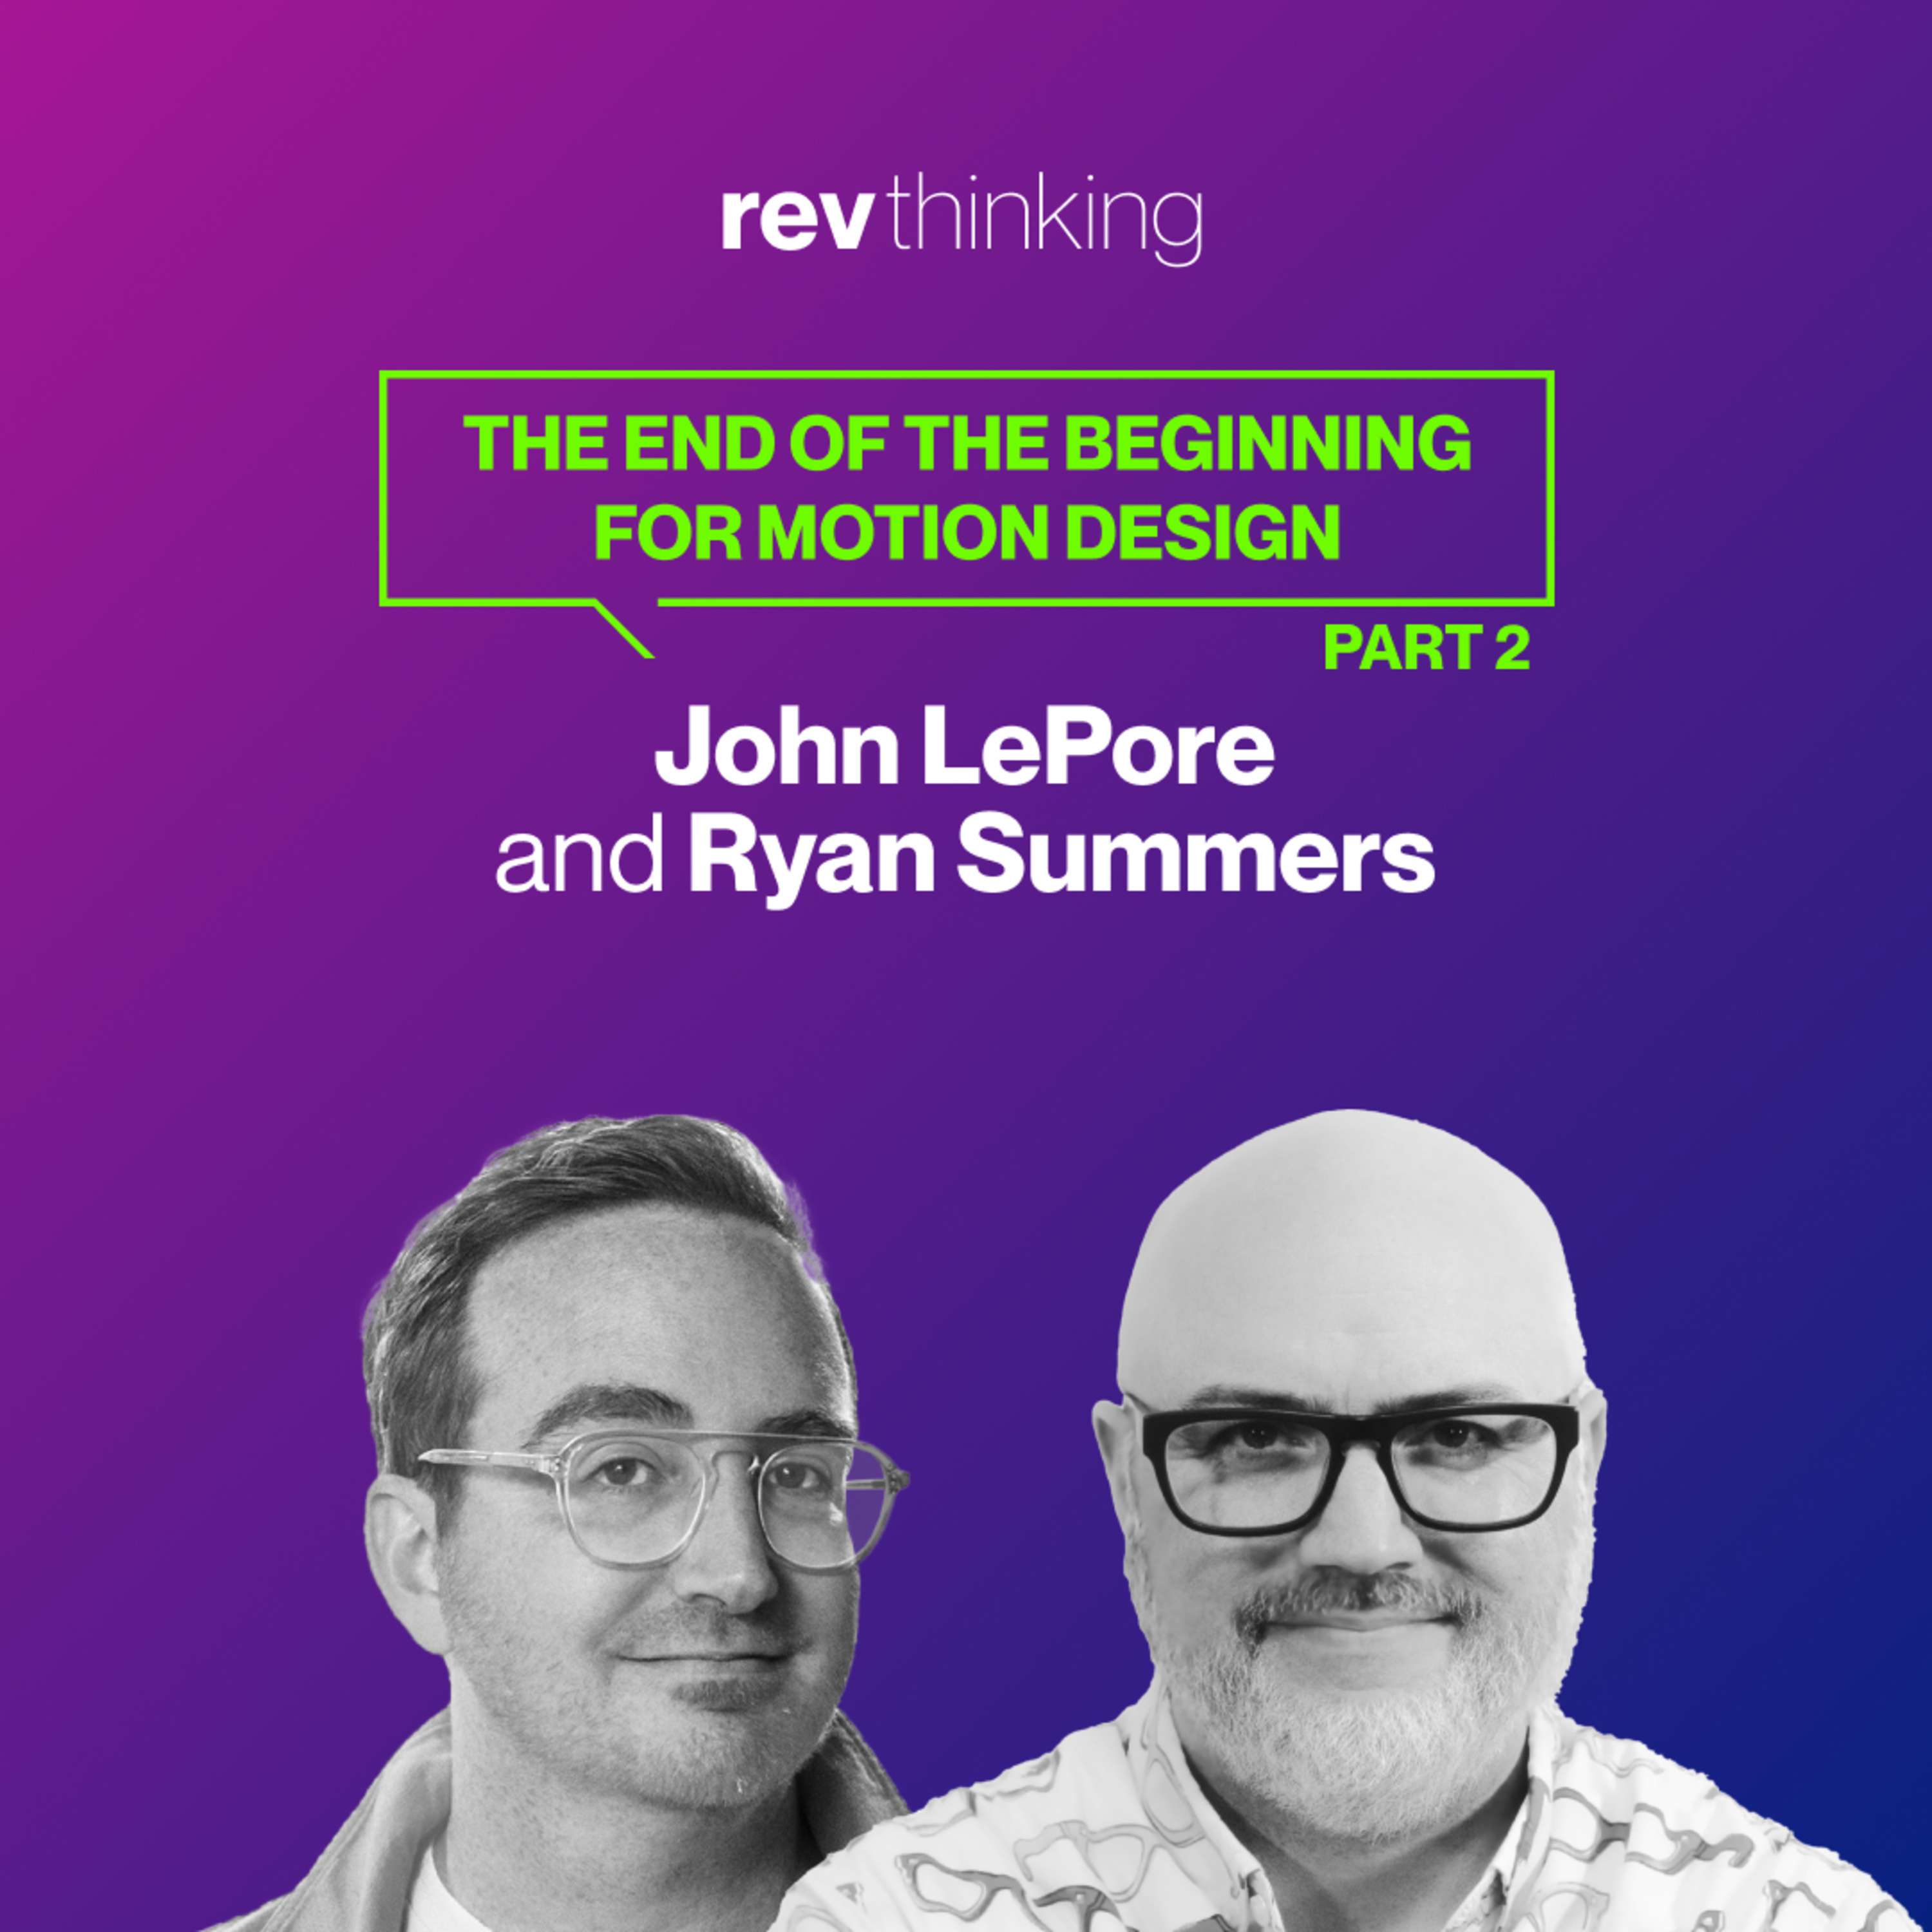 The End of the Beginning for Motion Design | PART 2 with John LePore and Ryan Summers